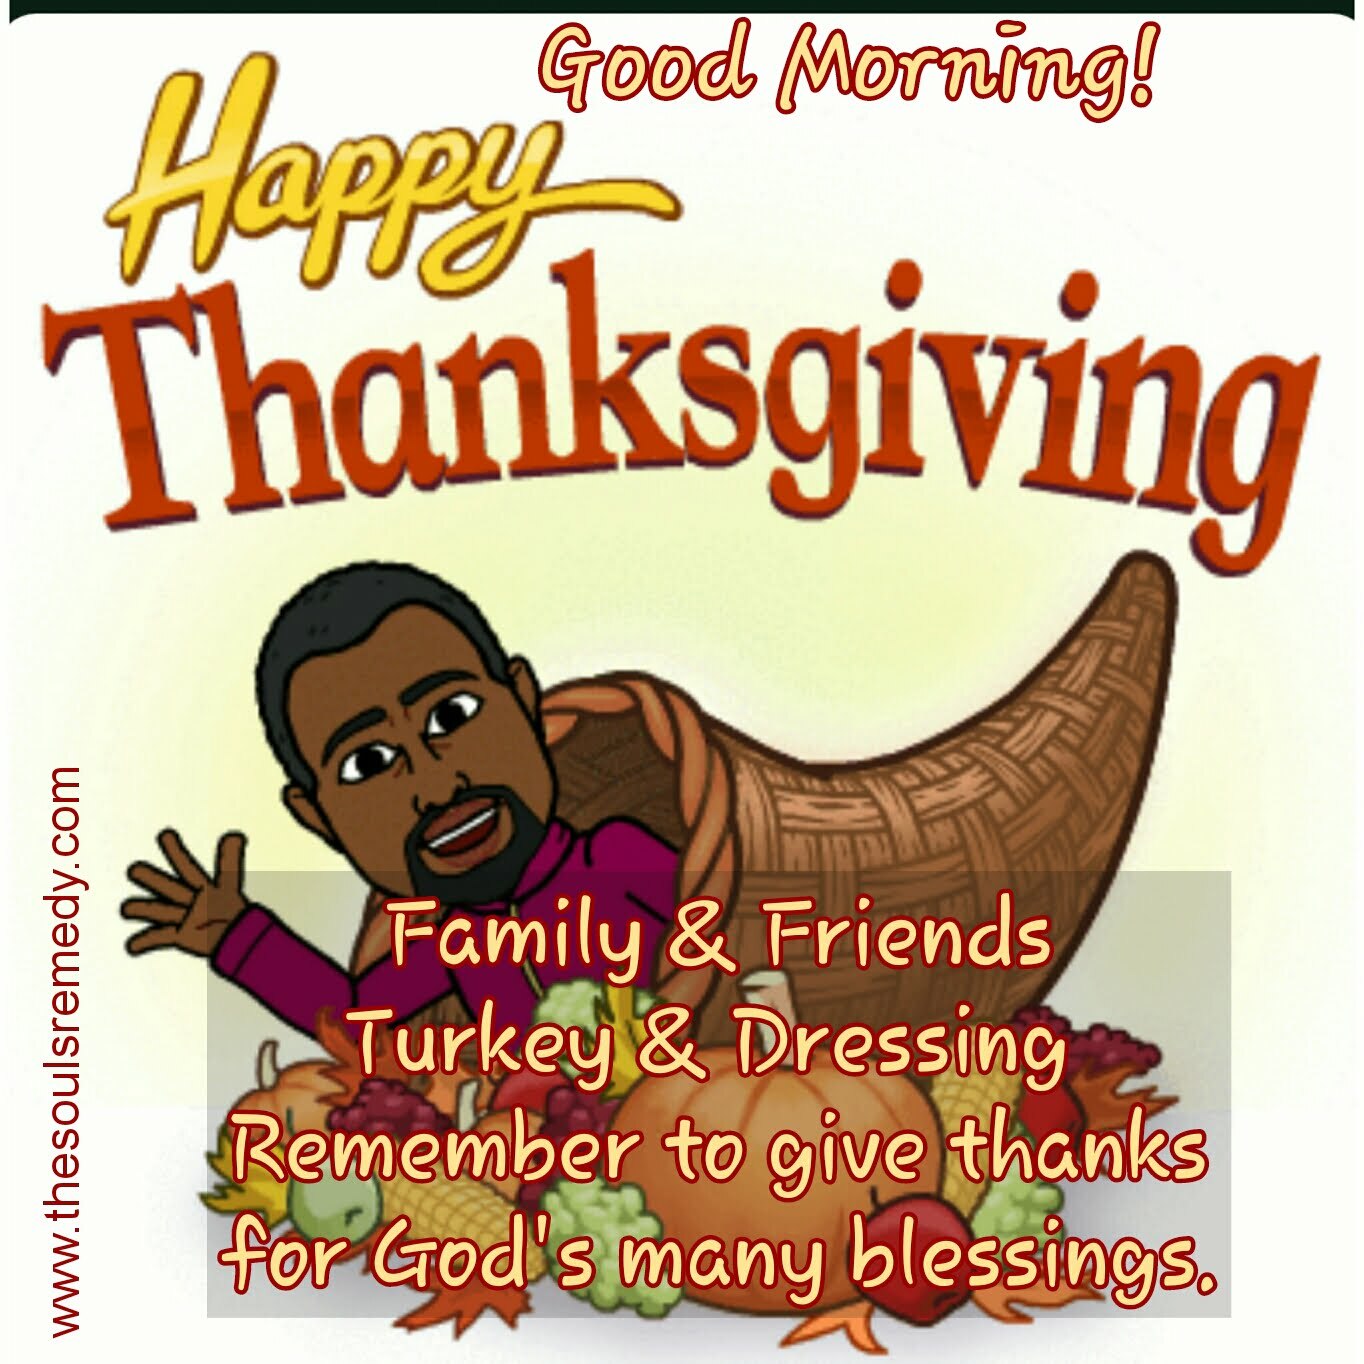 Good Morning Happy Thanksgiving to Family and Friends